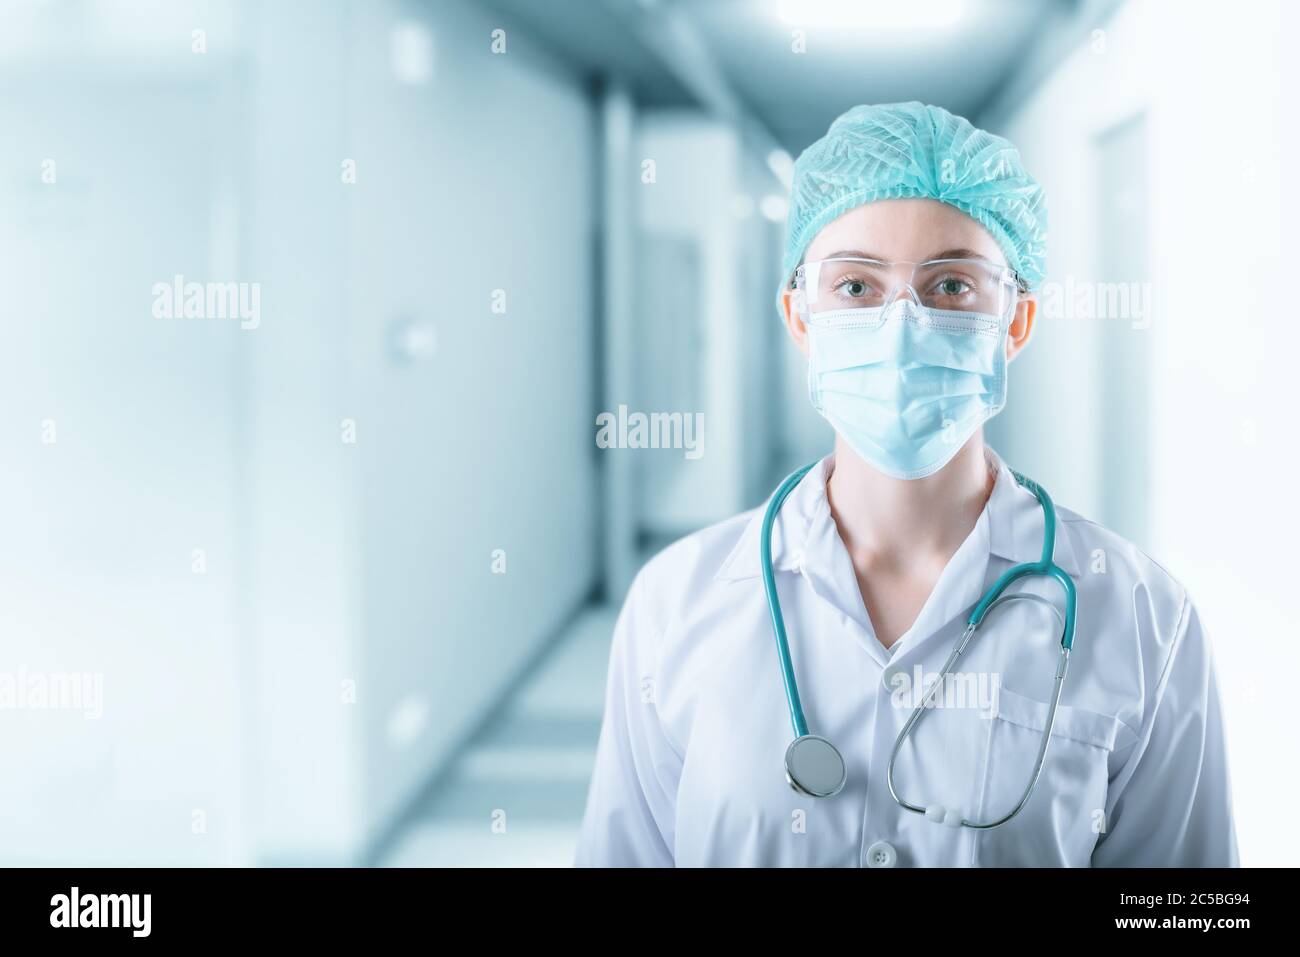 Medical Surgical Doctor and Health Care, Portrait of Surgeon Doctor in PPE Equipment on Isolated Background. Medicine Female Doctors Wearing Face Mask Stock Photo